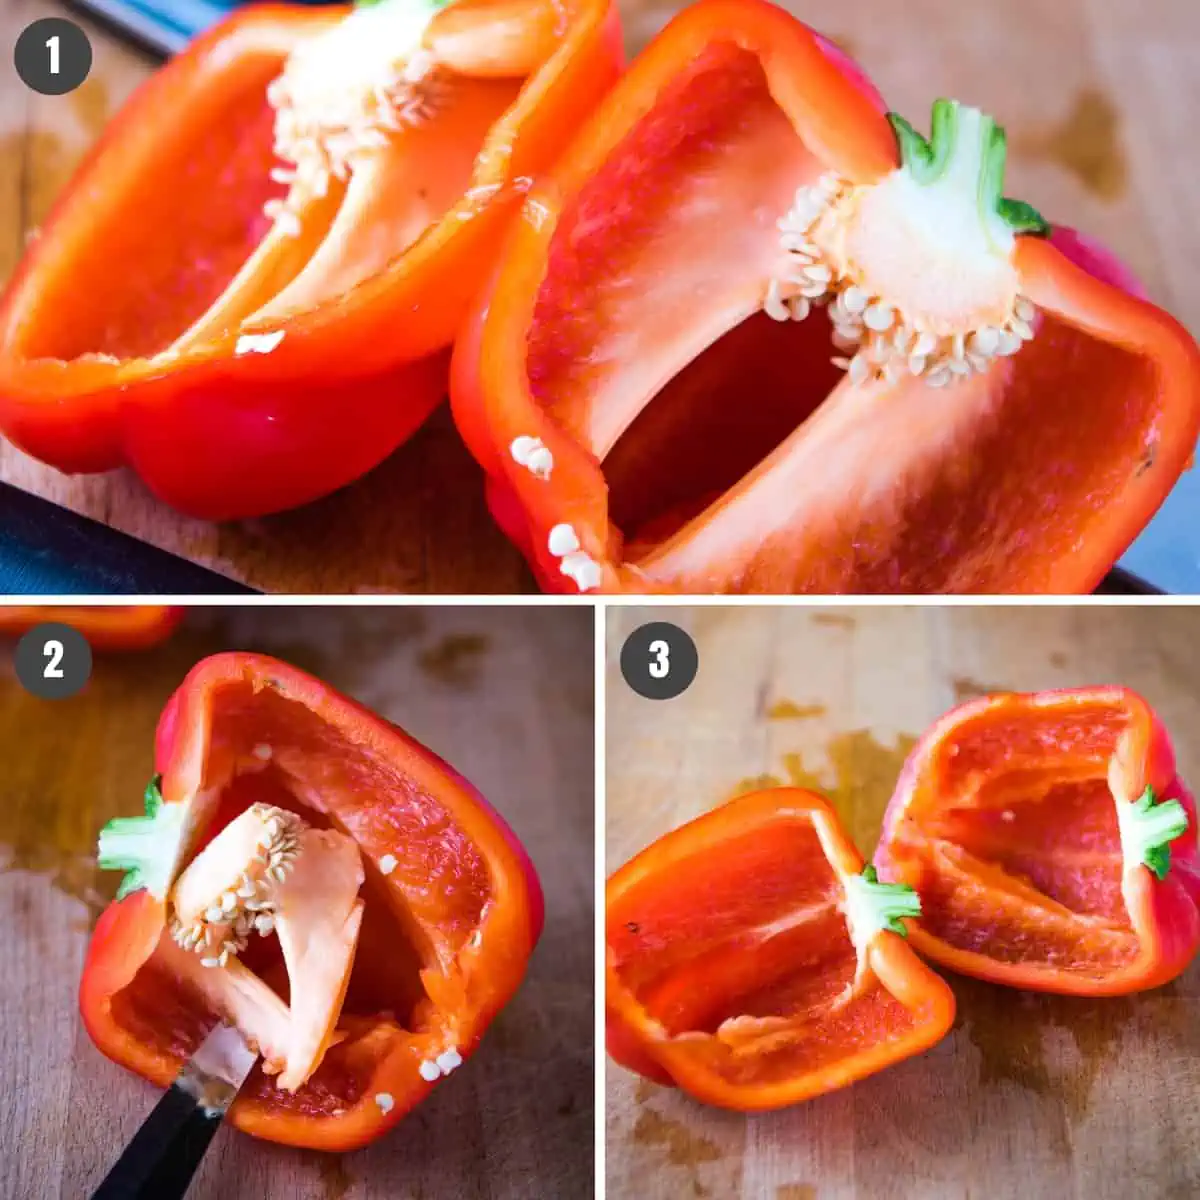 steps for how to cut a pepper into halves, including cutting and coring a red bell pepper on a butcher block cutting board